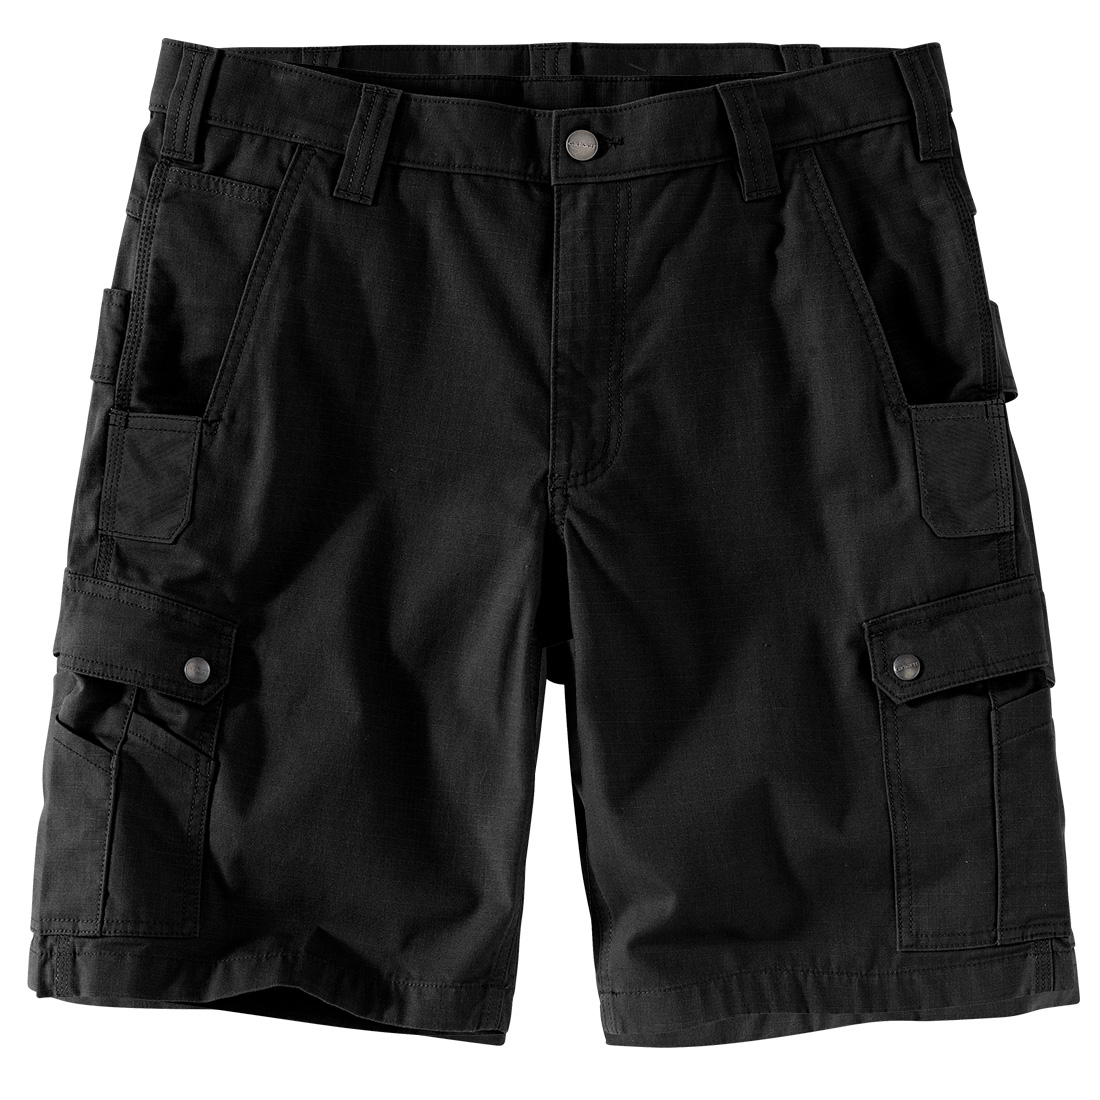 Carhartt Ripstop Cargo Work Short black, Trousers and Shorts, Clothing